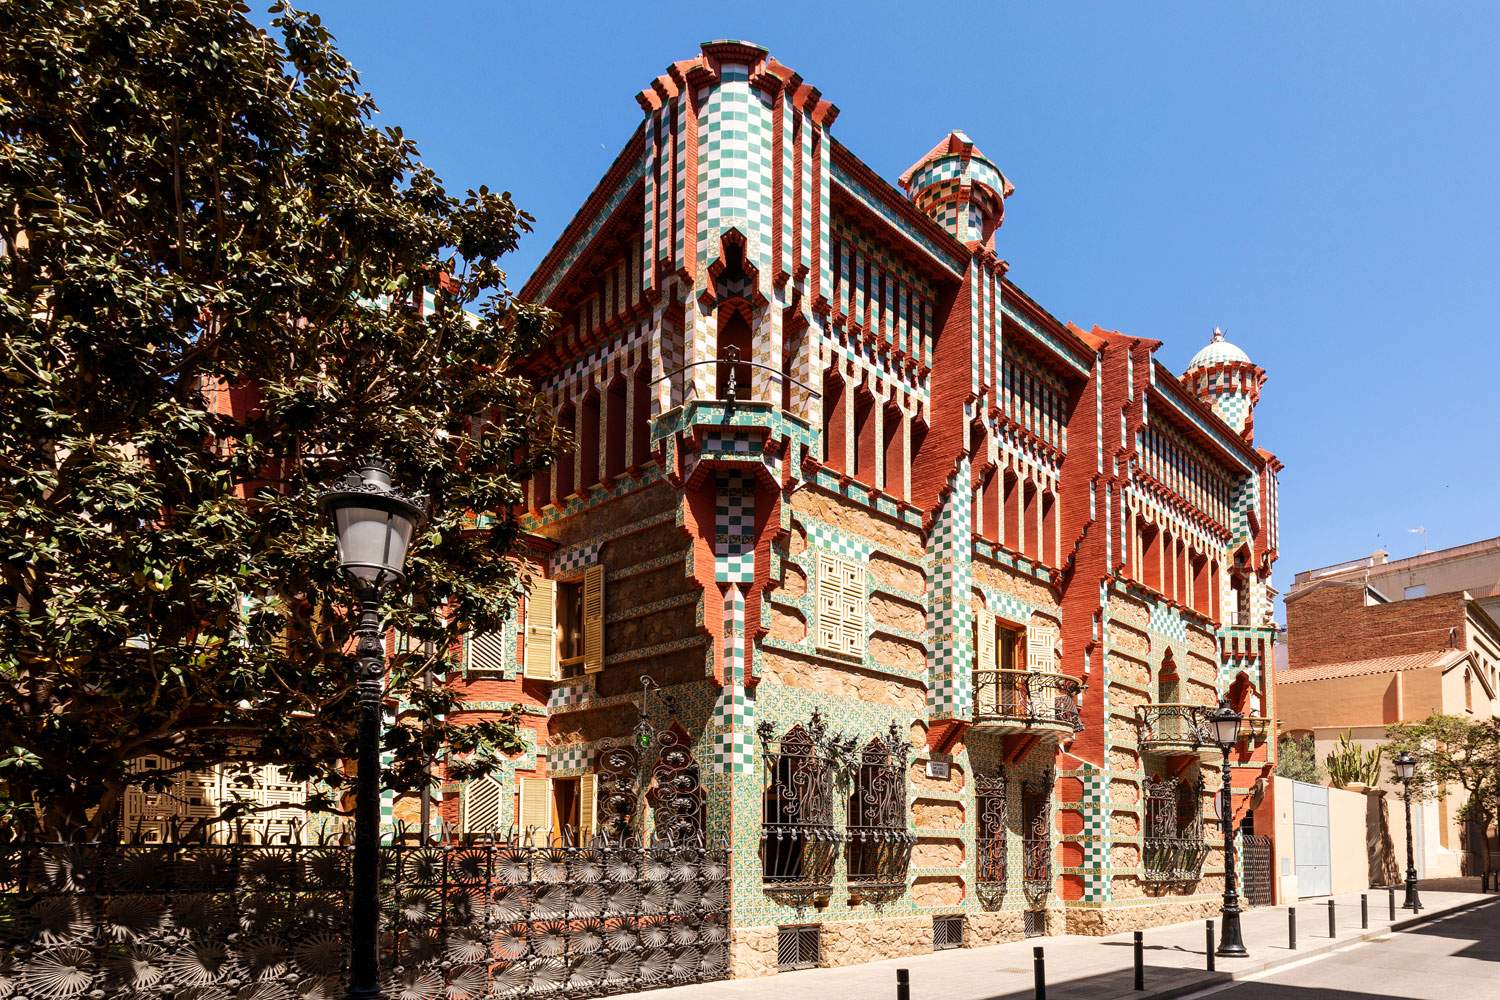 Barcelona, with Airbnb you can sleep in Antoni GaudÃ­'s Casa Vicens for 1 euro